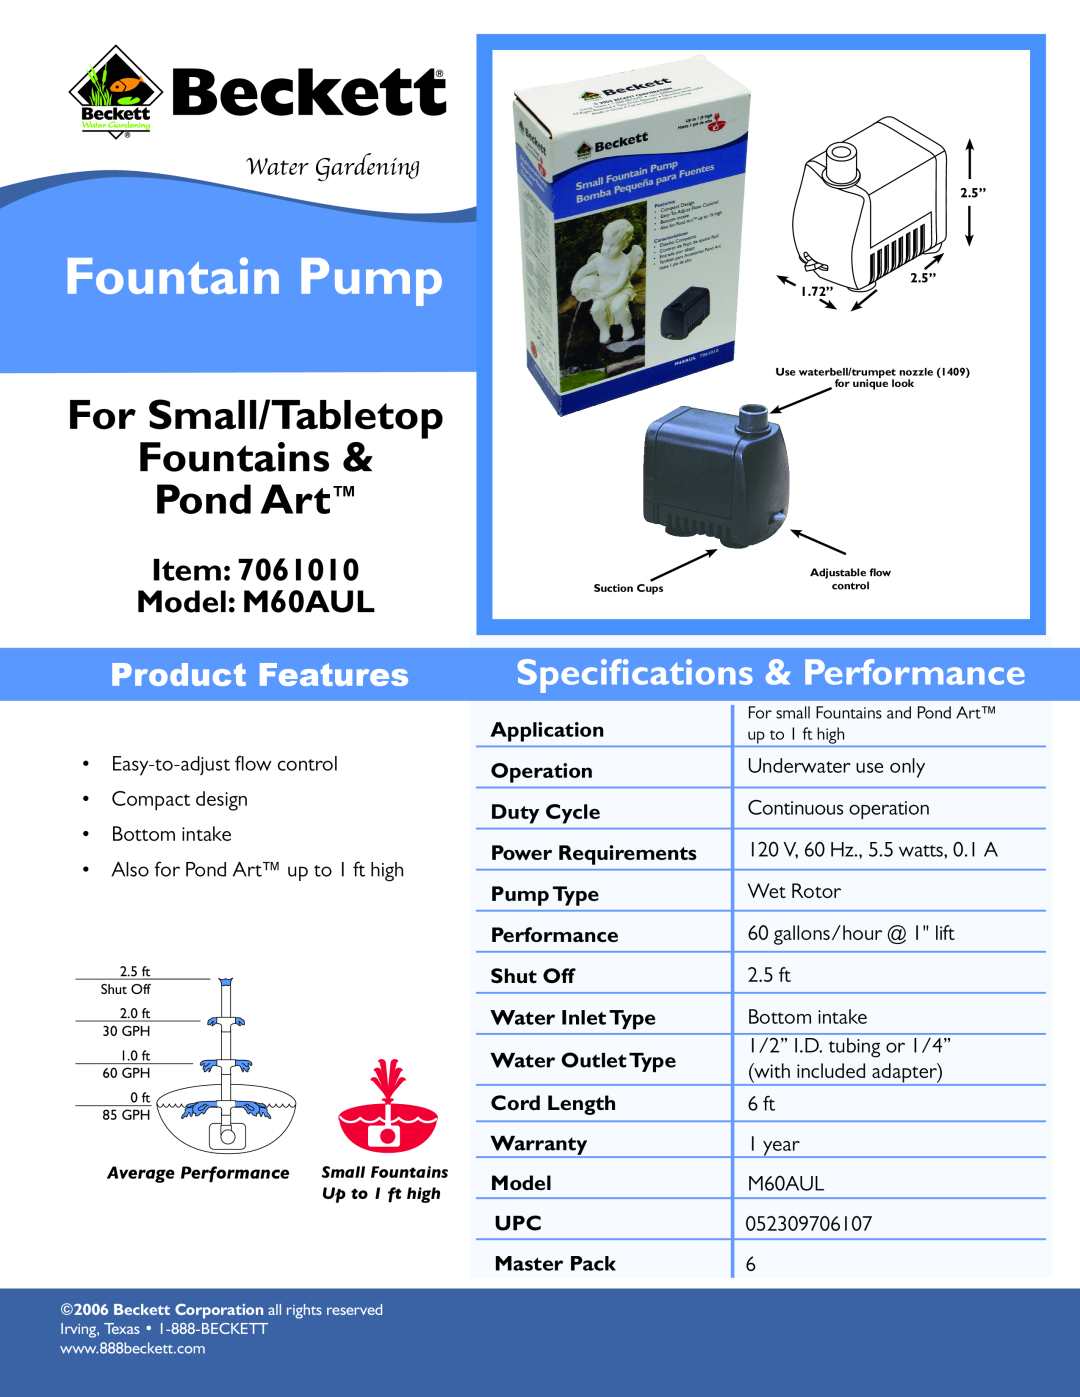 Beckett Water Gardening specifications Fountain Pump, For Small/Tabletop Fountains Pond Art, Model M60AUL 